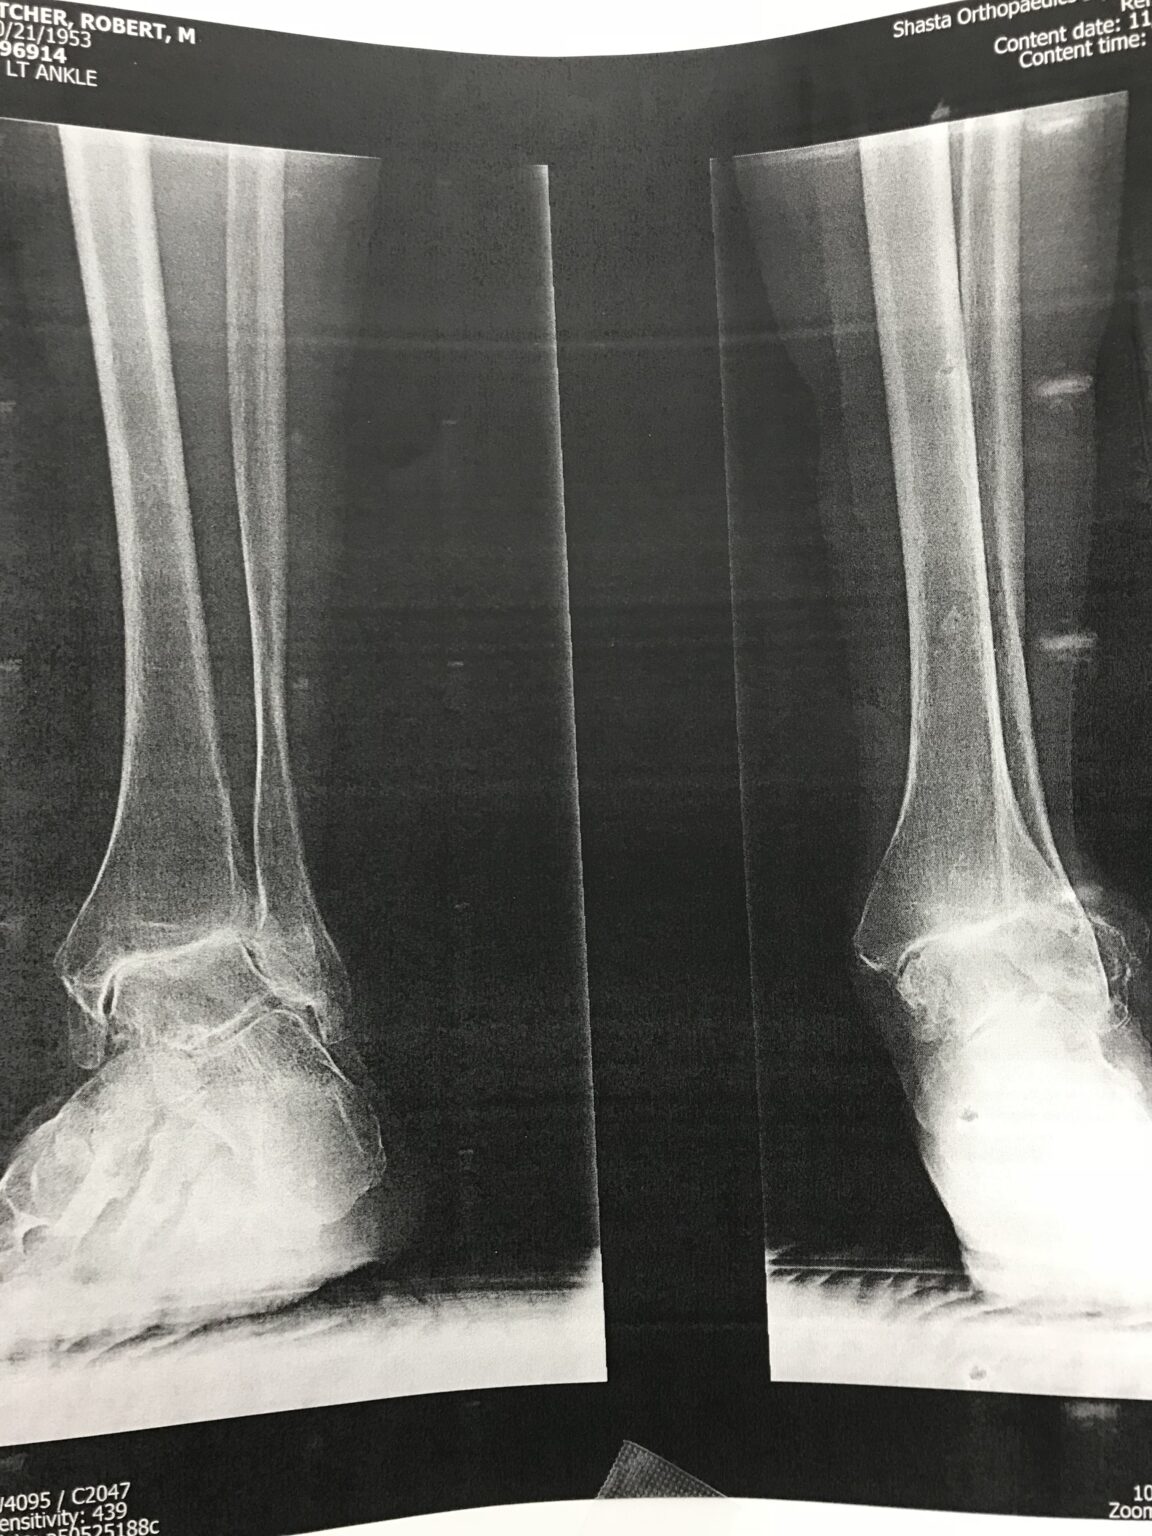 Total Ankle Replacement Arthroplasty X Ray Image B Shasta Orthopaedics